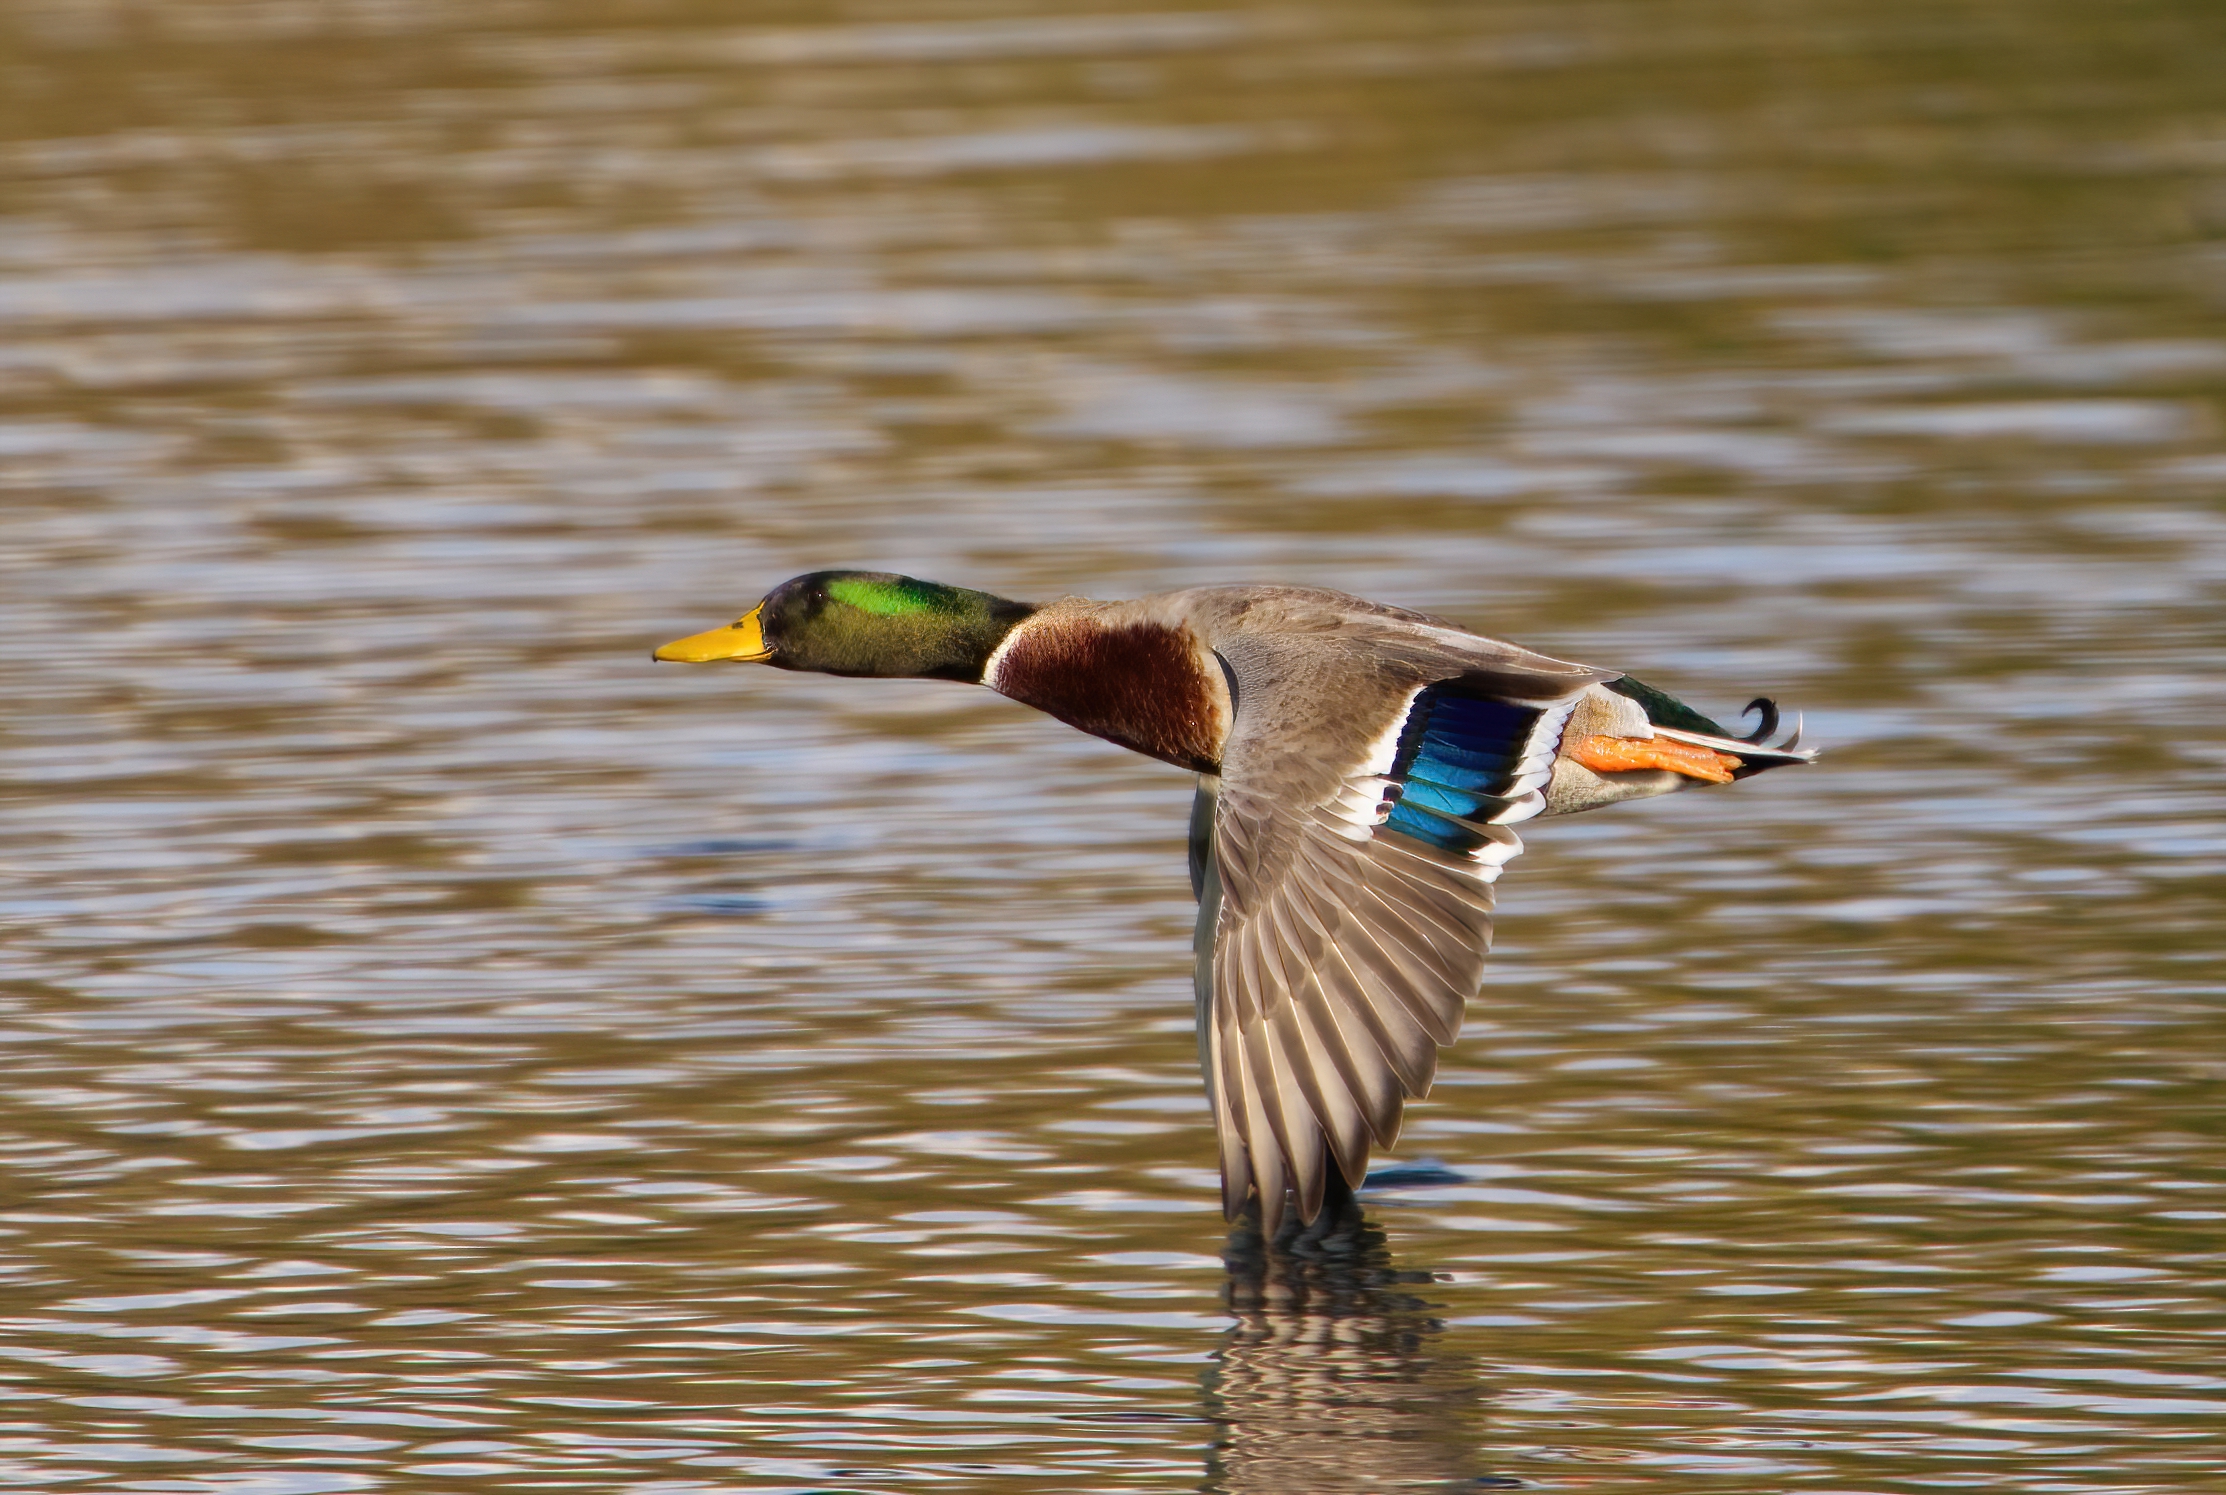 The colors of the mallard...